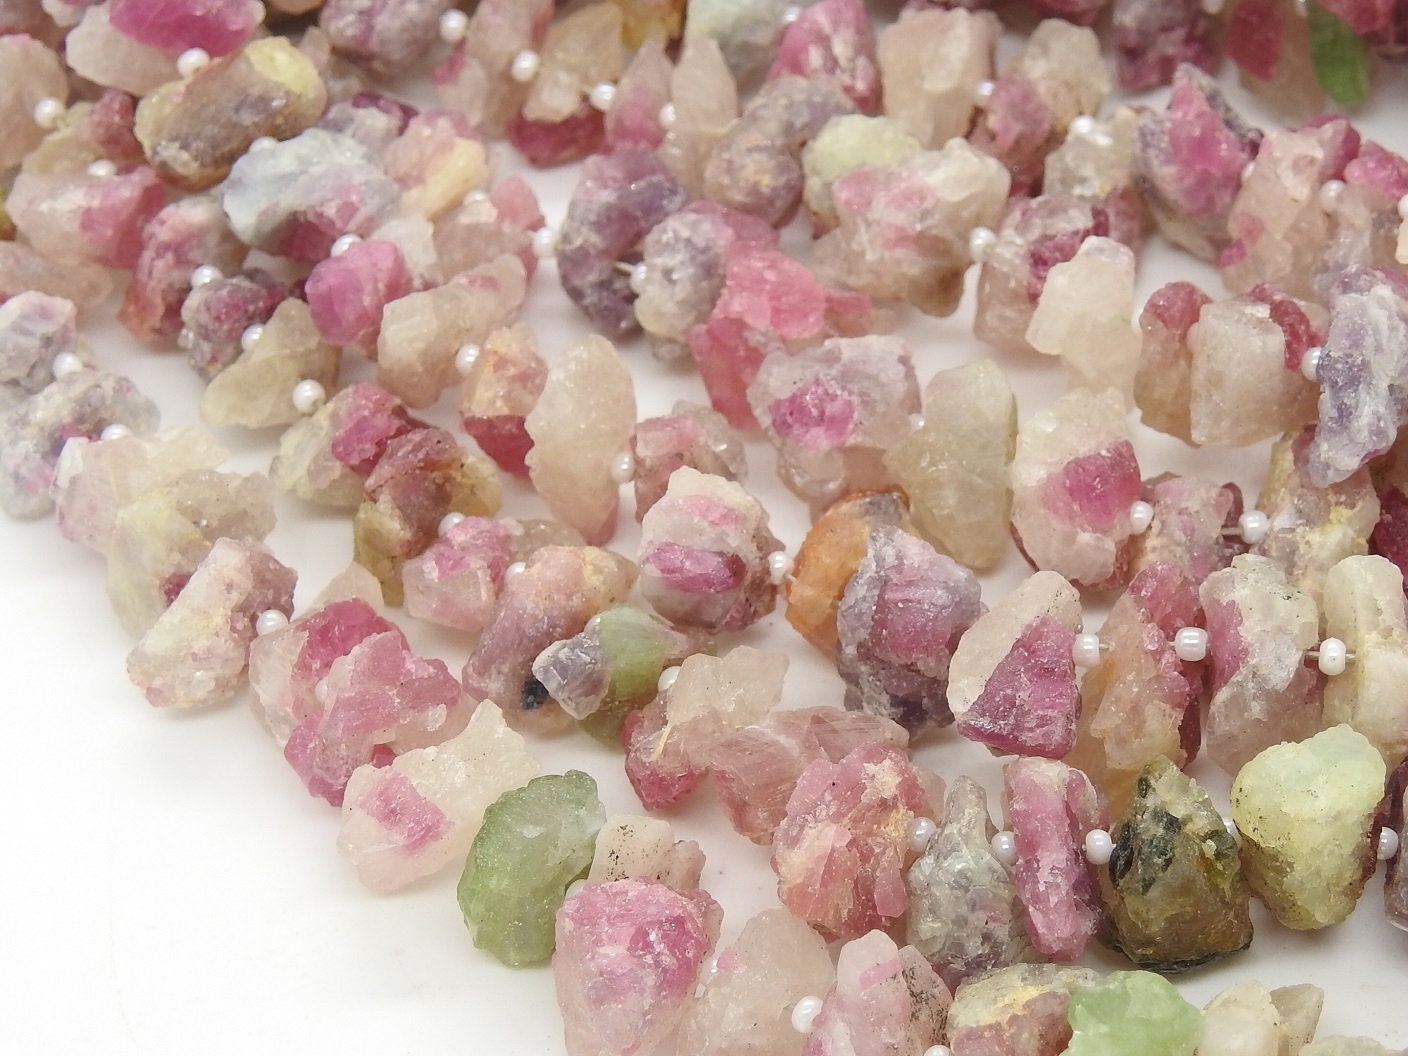 Pink Tourmaline Natural Rough Beads,Uncut,Chip,Nuggets,Anklets 18X10To10X7MM Approx Wholesale Price,New Arrival RB2 | Save 33% - Rajasthan Living 13